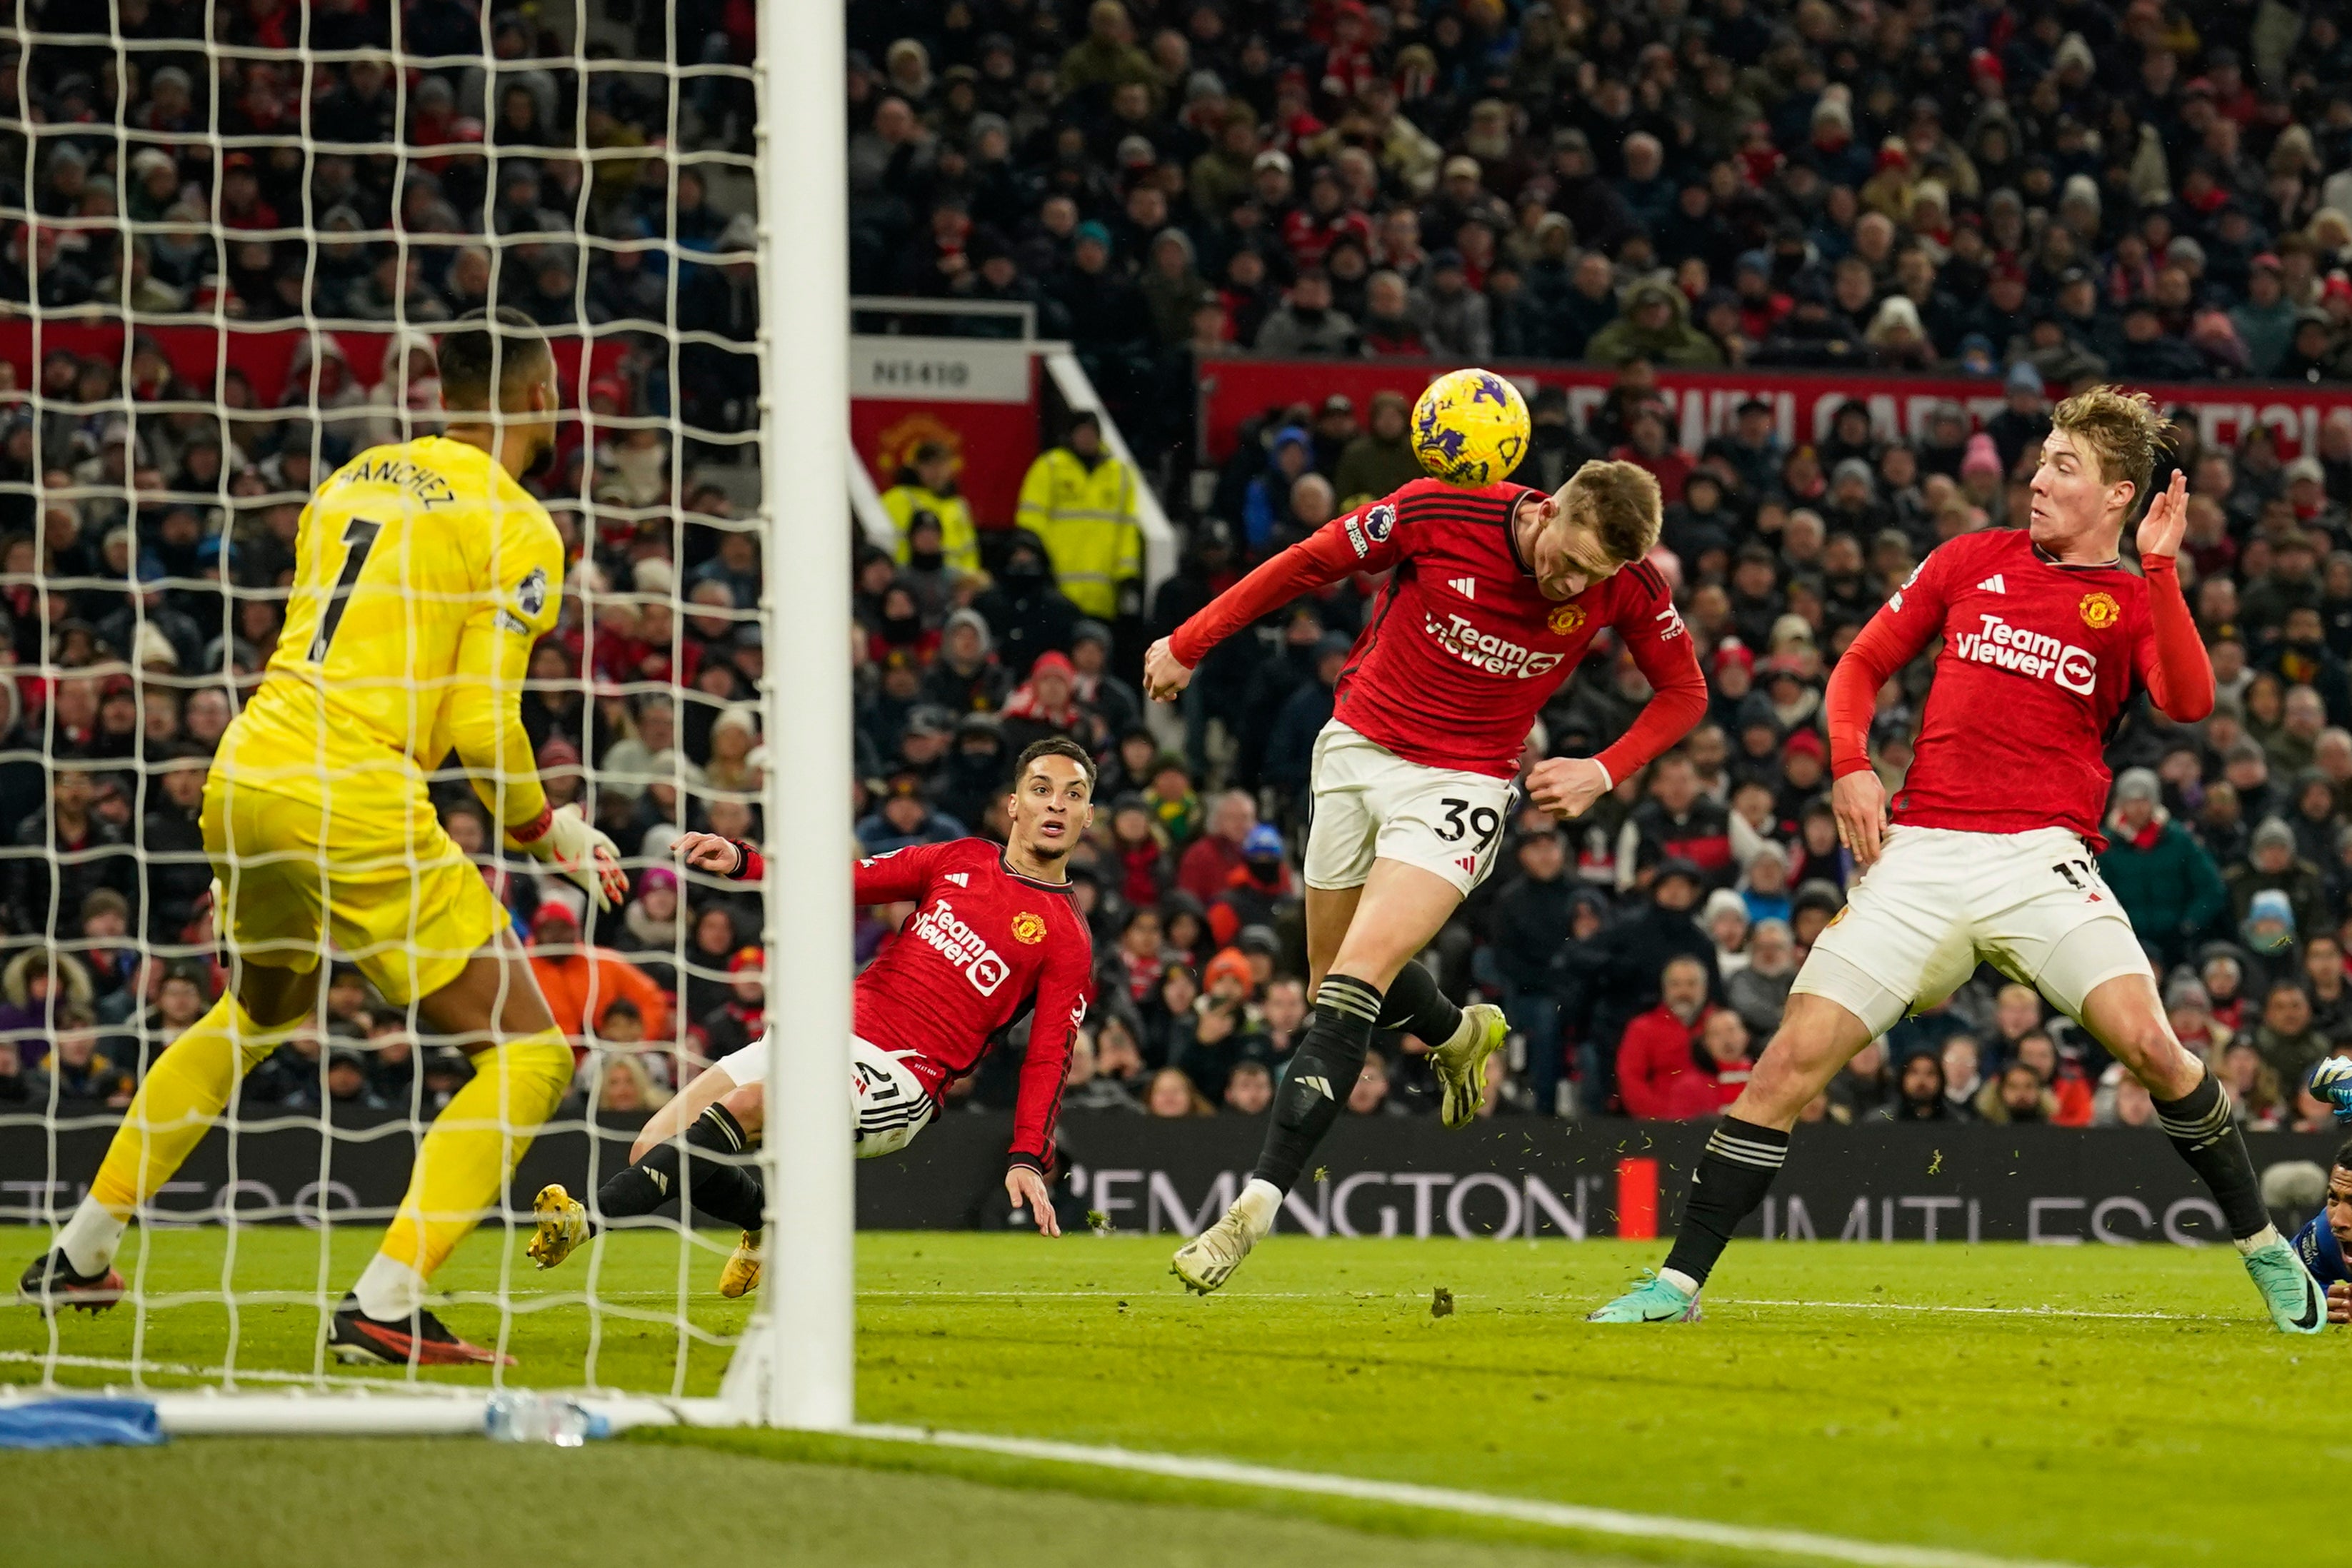 McTominay’s header sent United ahead and secured the three points